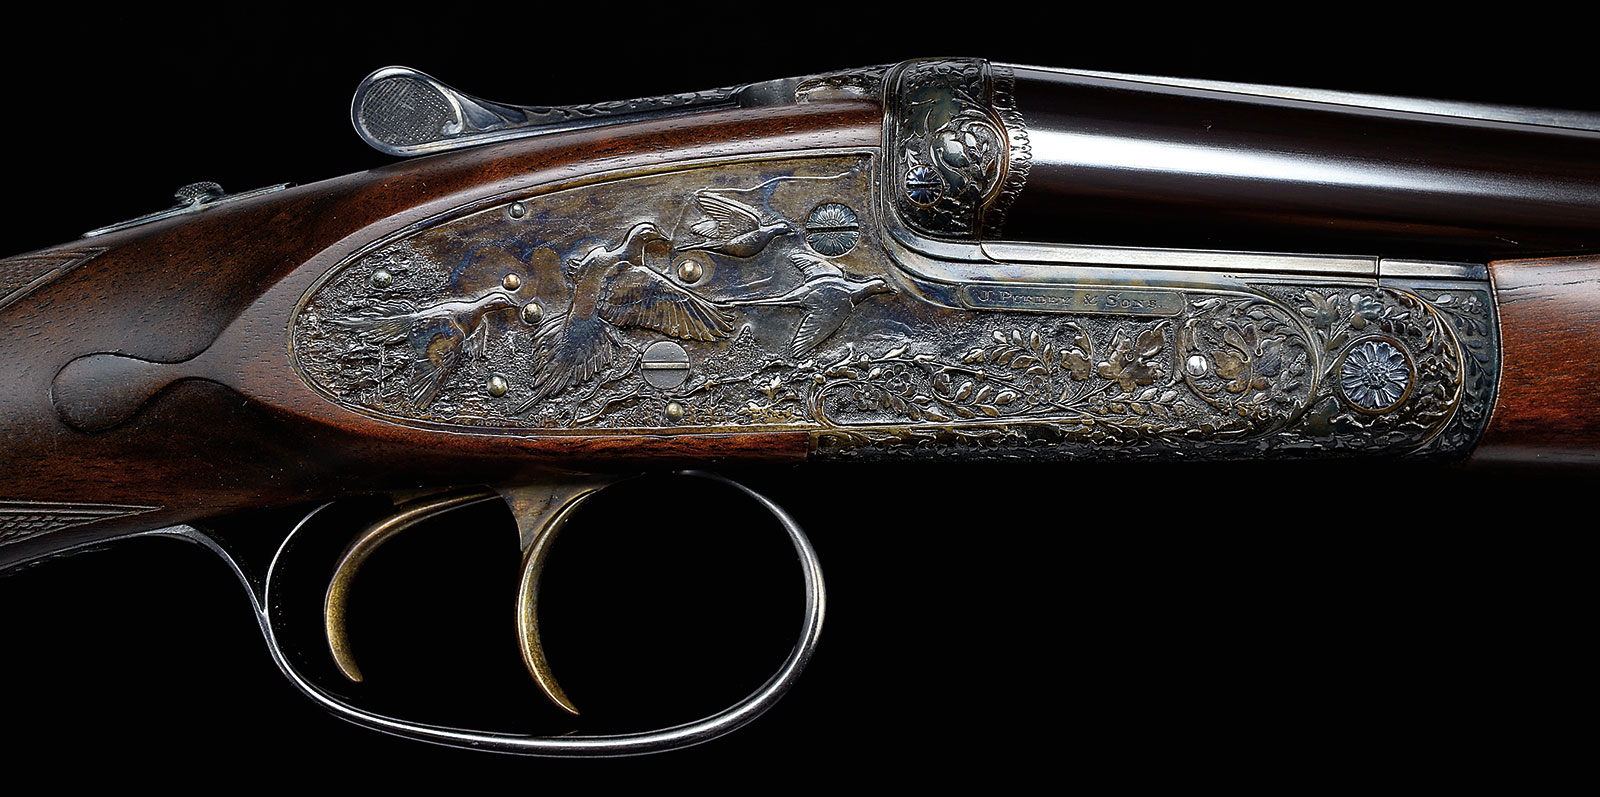 Exceptional Ken Hunt Relief Sculpted James Purdey cal .410 Sidelock Ejector Game Gun; estimated at $80,000-120,000, sold for $103,500.